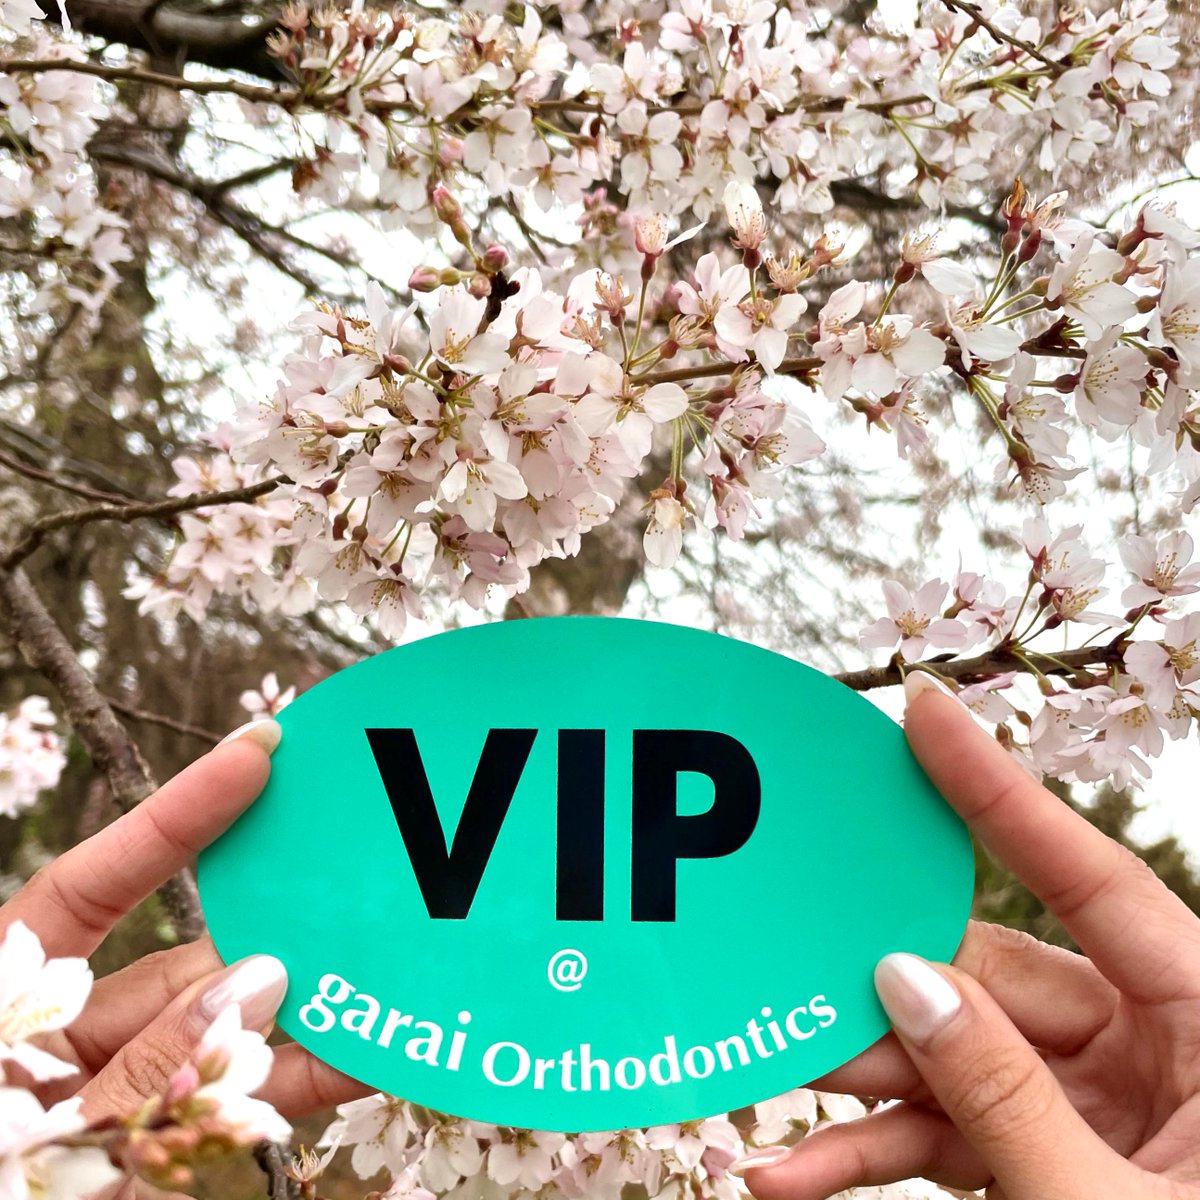 Start off the spring season with a FREE consultation for a brand new smile! 

#spirngishere #ortho #fyp #free #braces #invisalign #cherryblossoms #vip #dmvarea #vienna #greatfalls #smile #teeth #happy